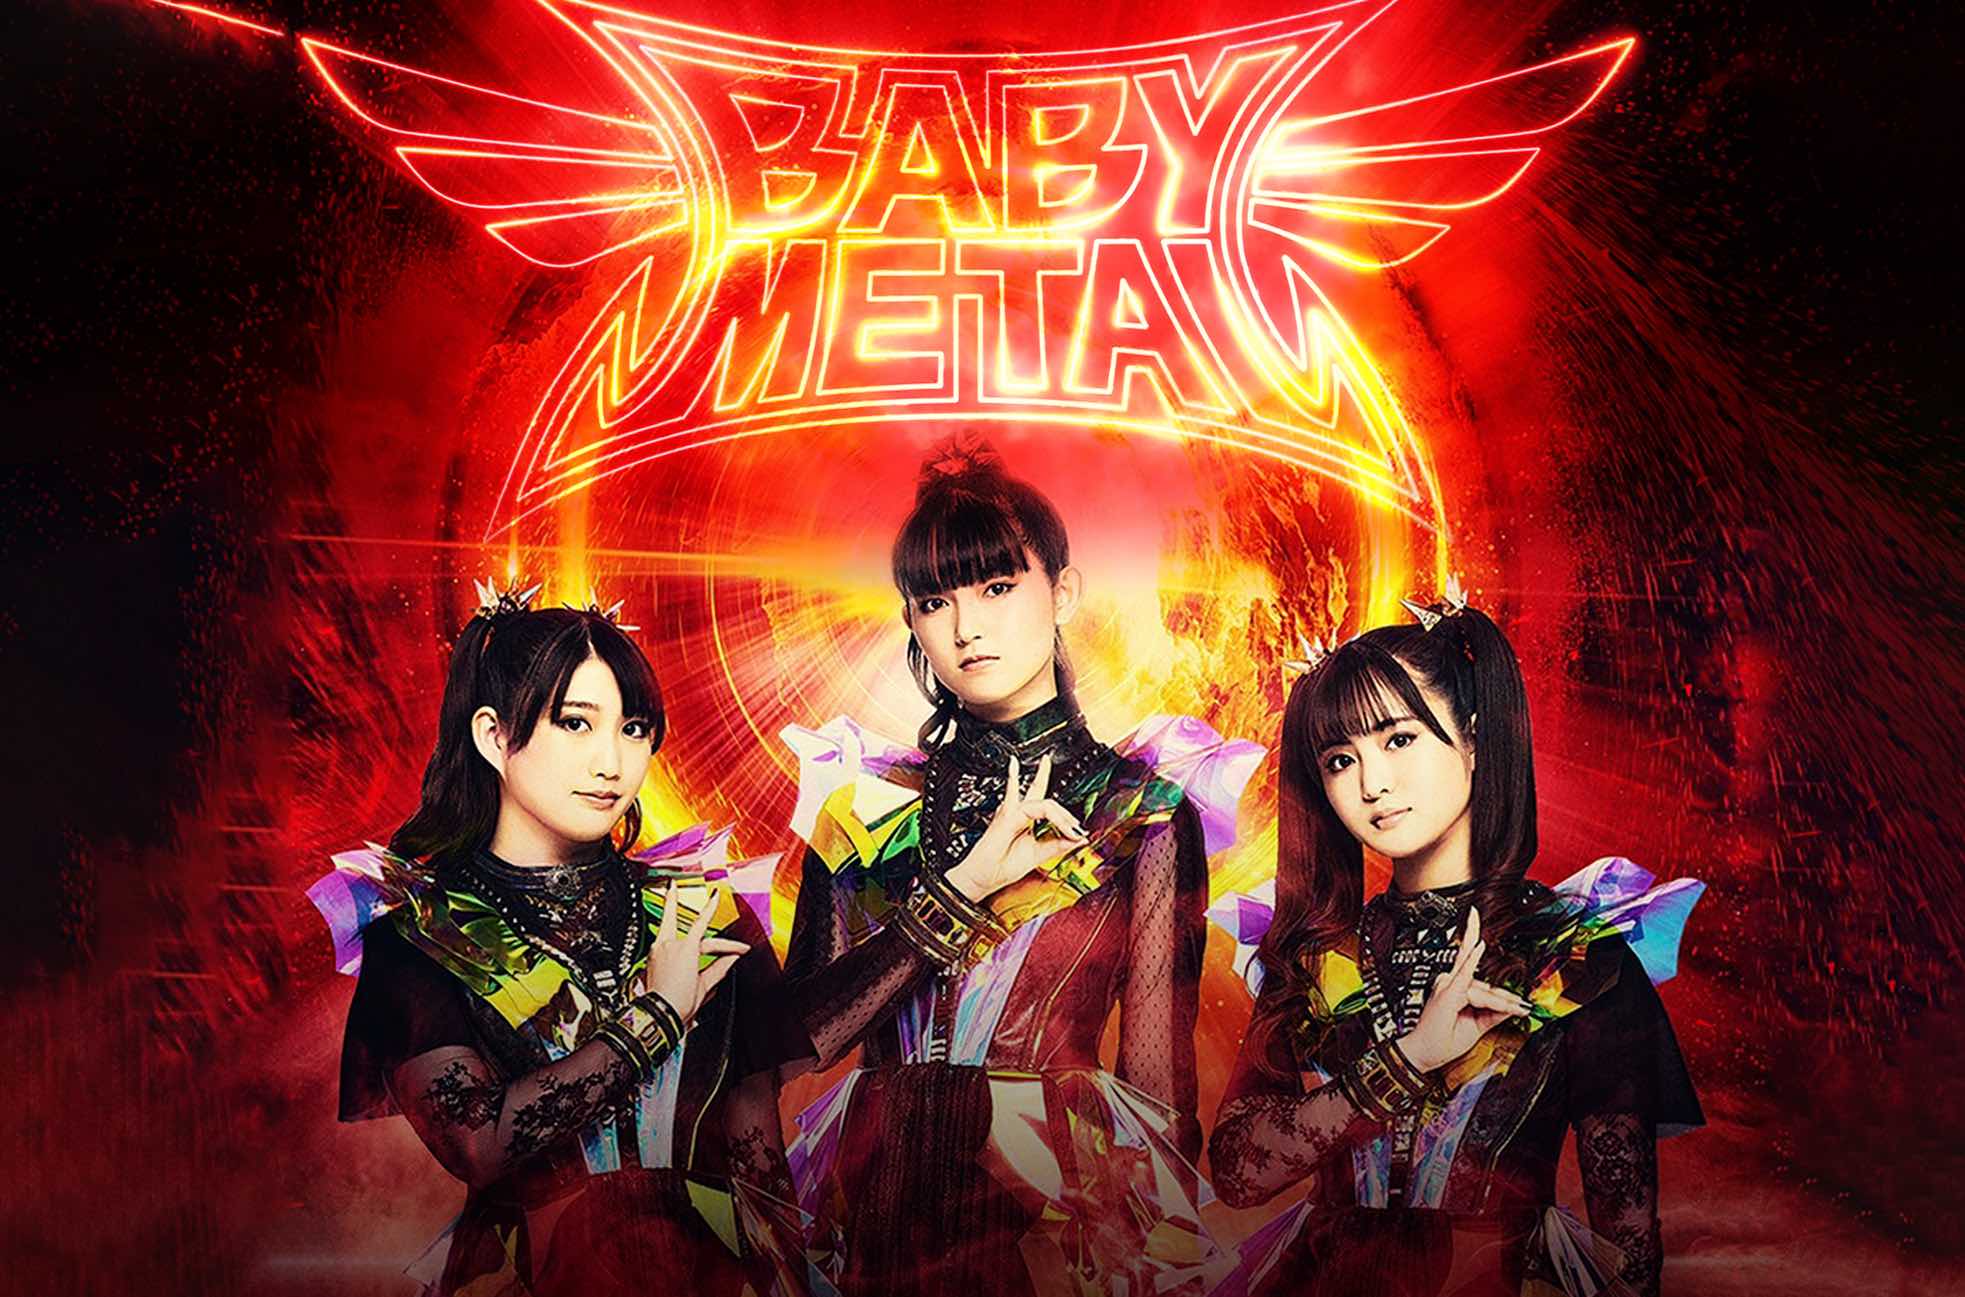 , Japanese ‘kawaii metal’ band Babymetal to perform at Capitol Theatre in August